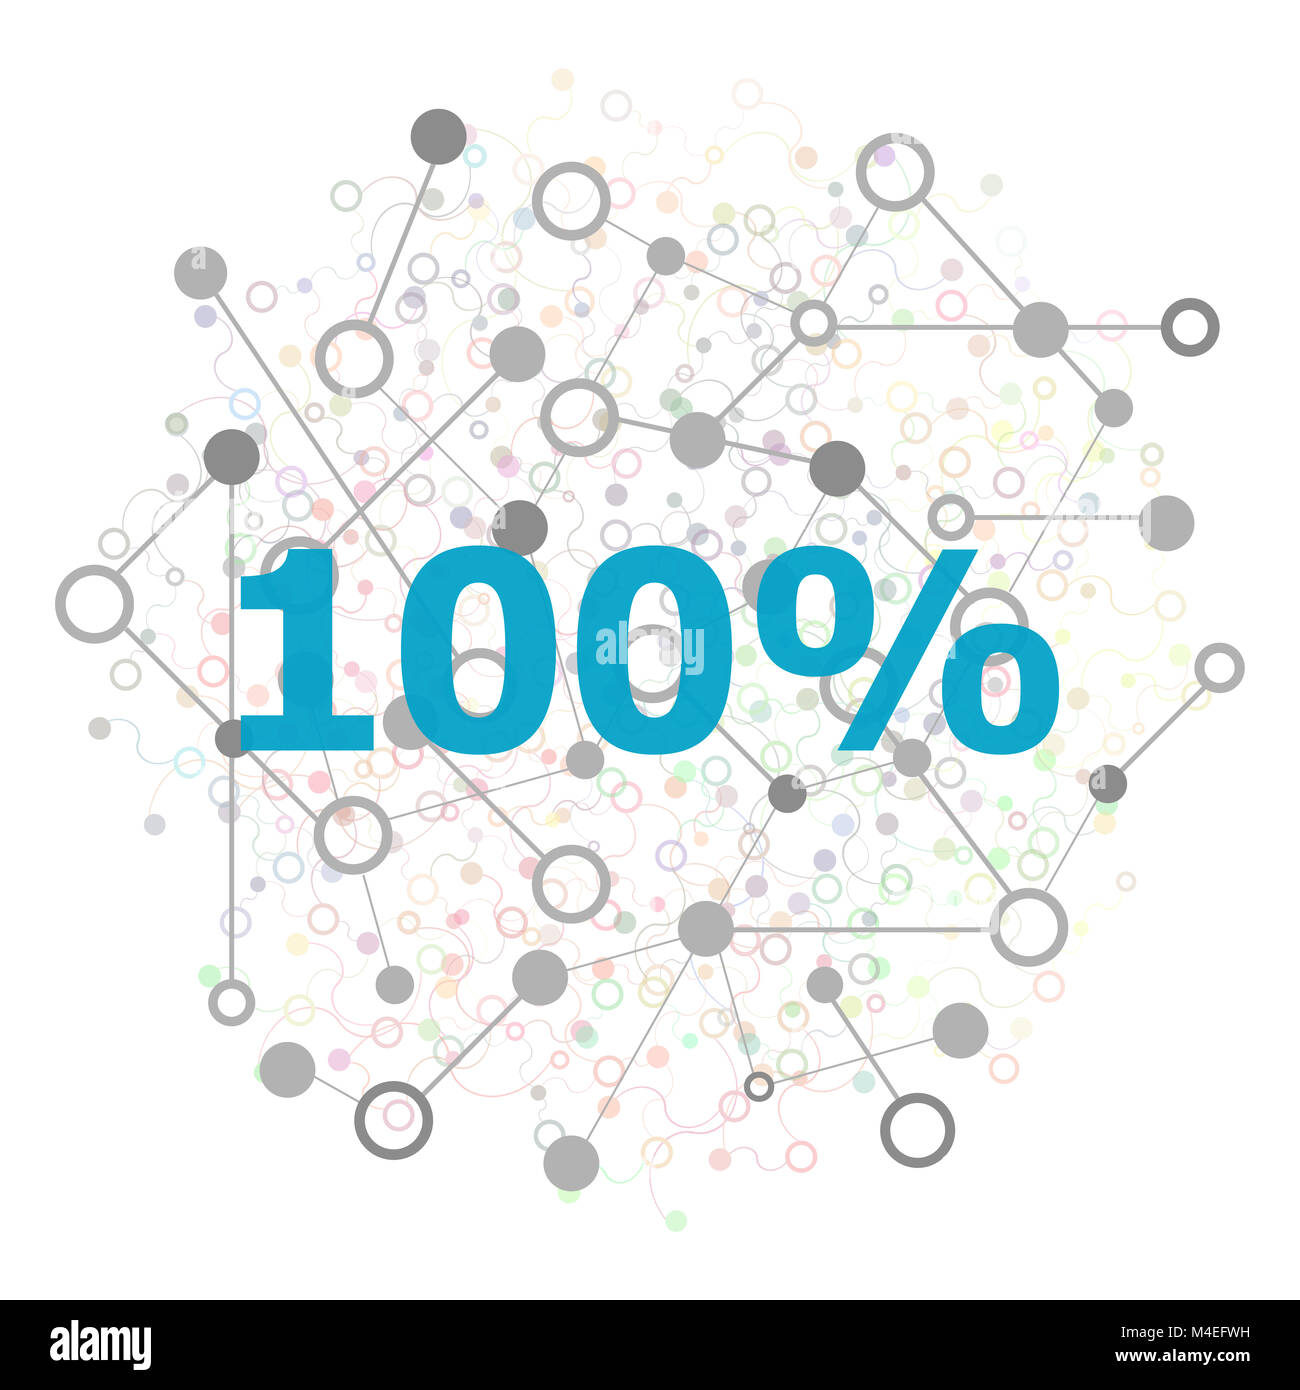 Text 100 percent. Business concept. Connecting dots and lines Stock Photo